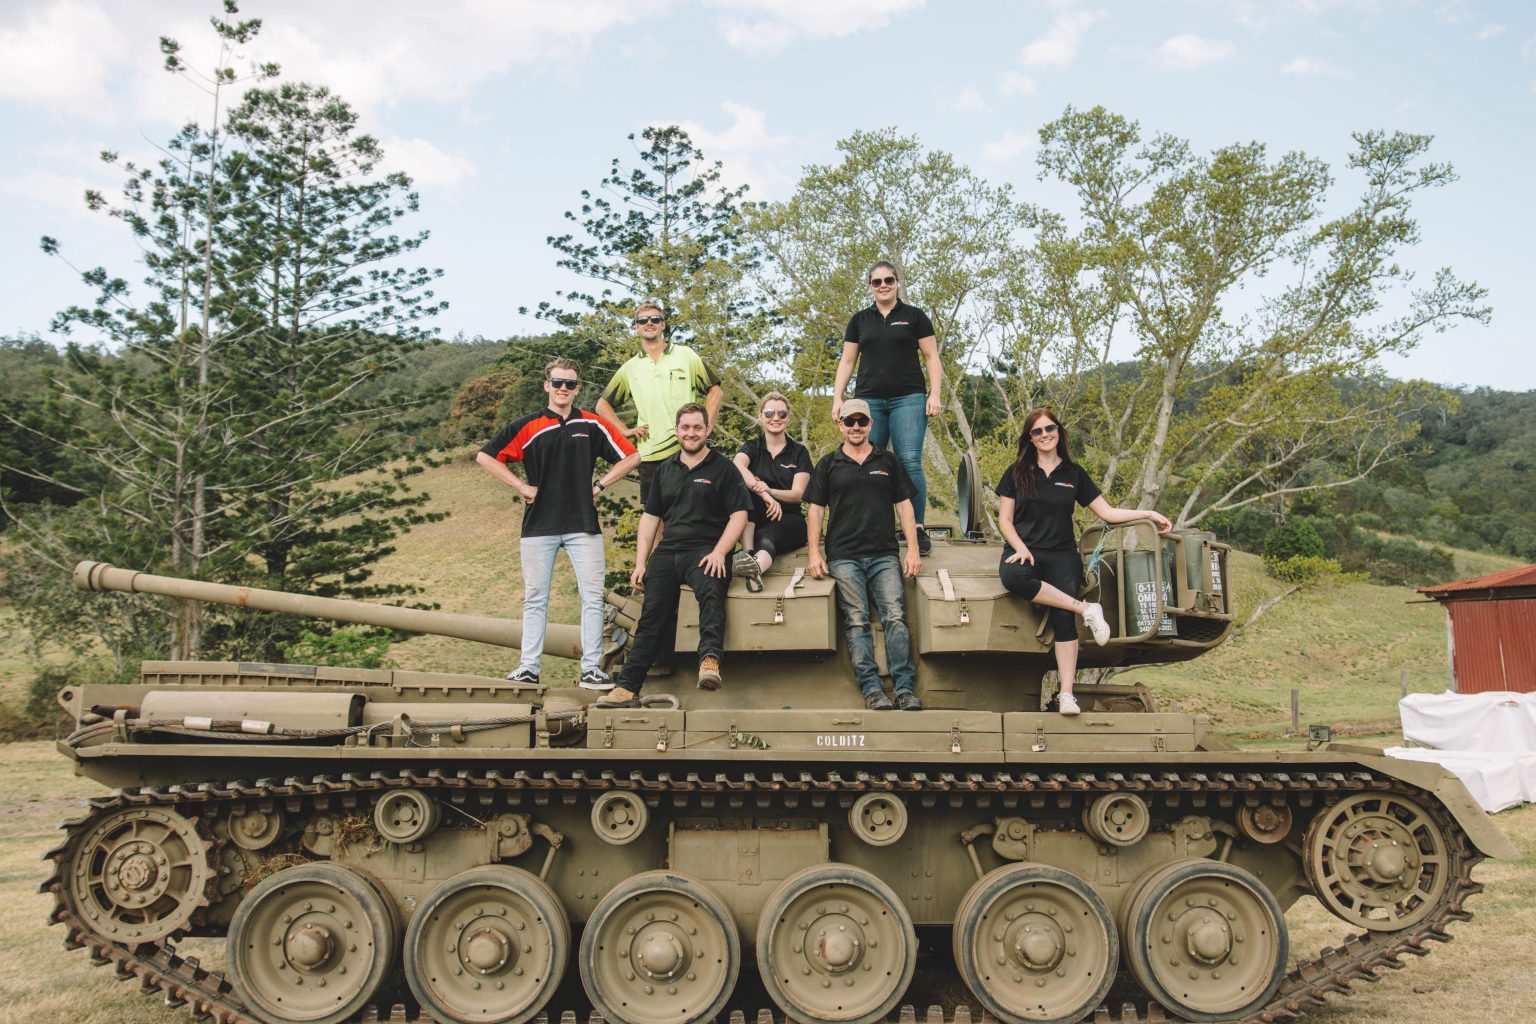 7 person giving pose to the picture standing on the fight weapon vehicles